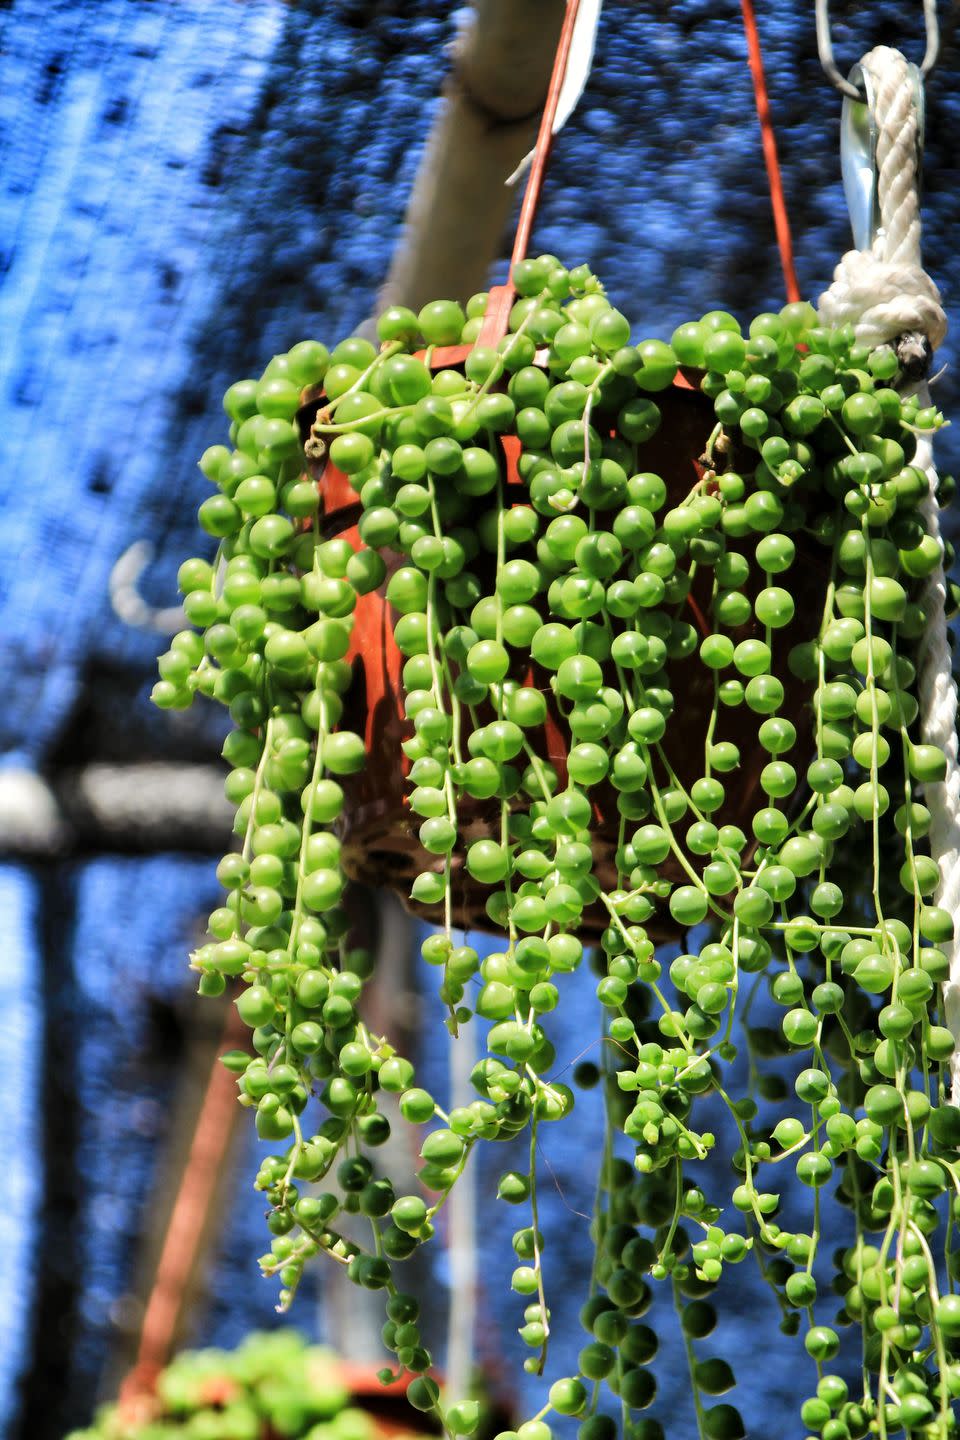 7) String of Pearls